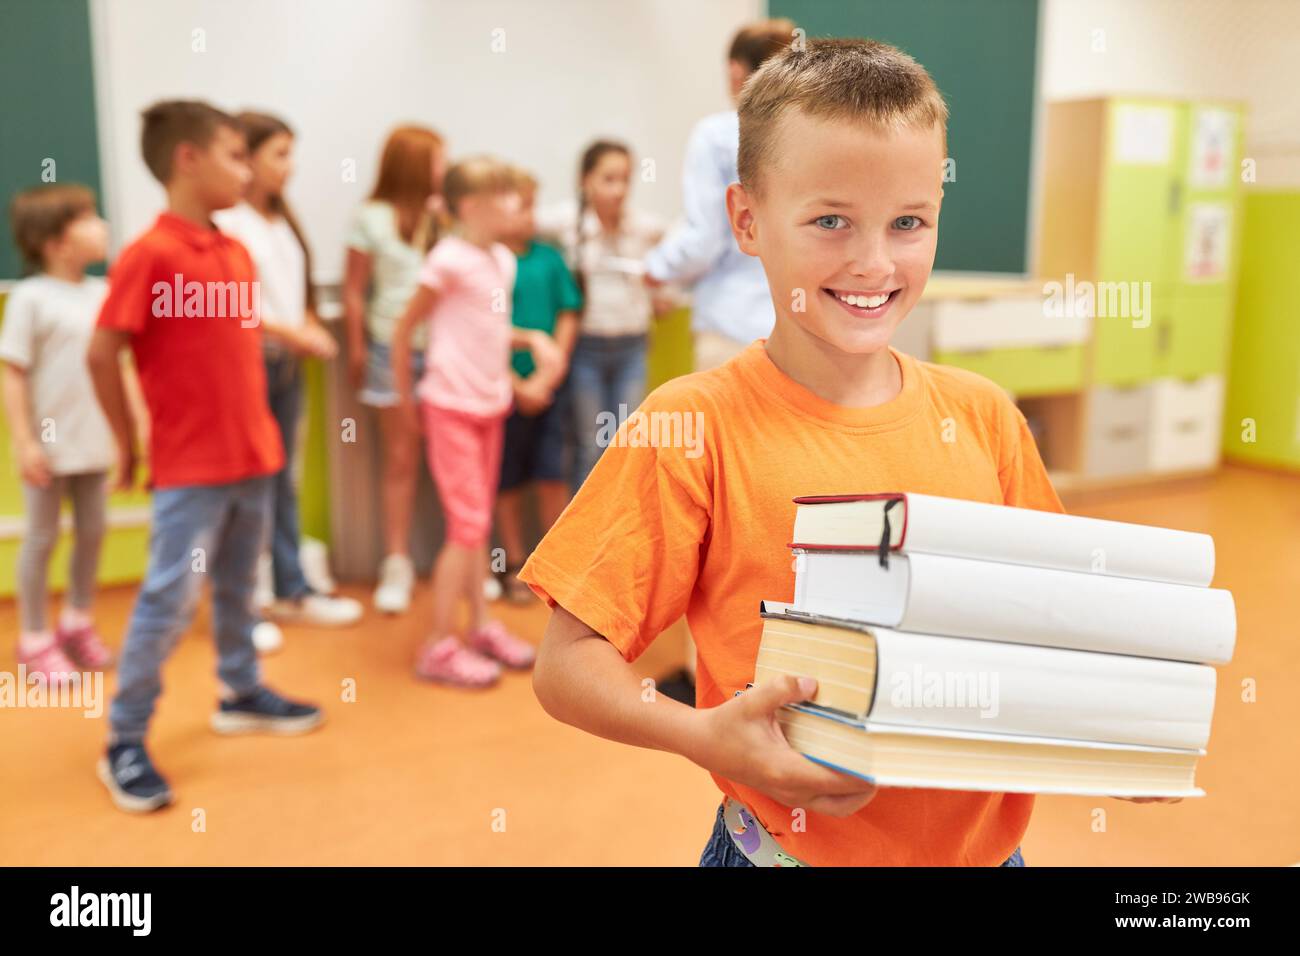 Portrait of smiling schoolboy holding stack of books while standing in class Stock Photo